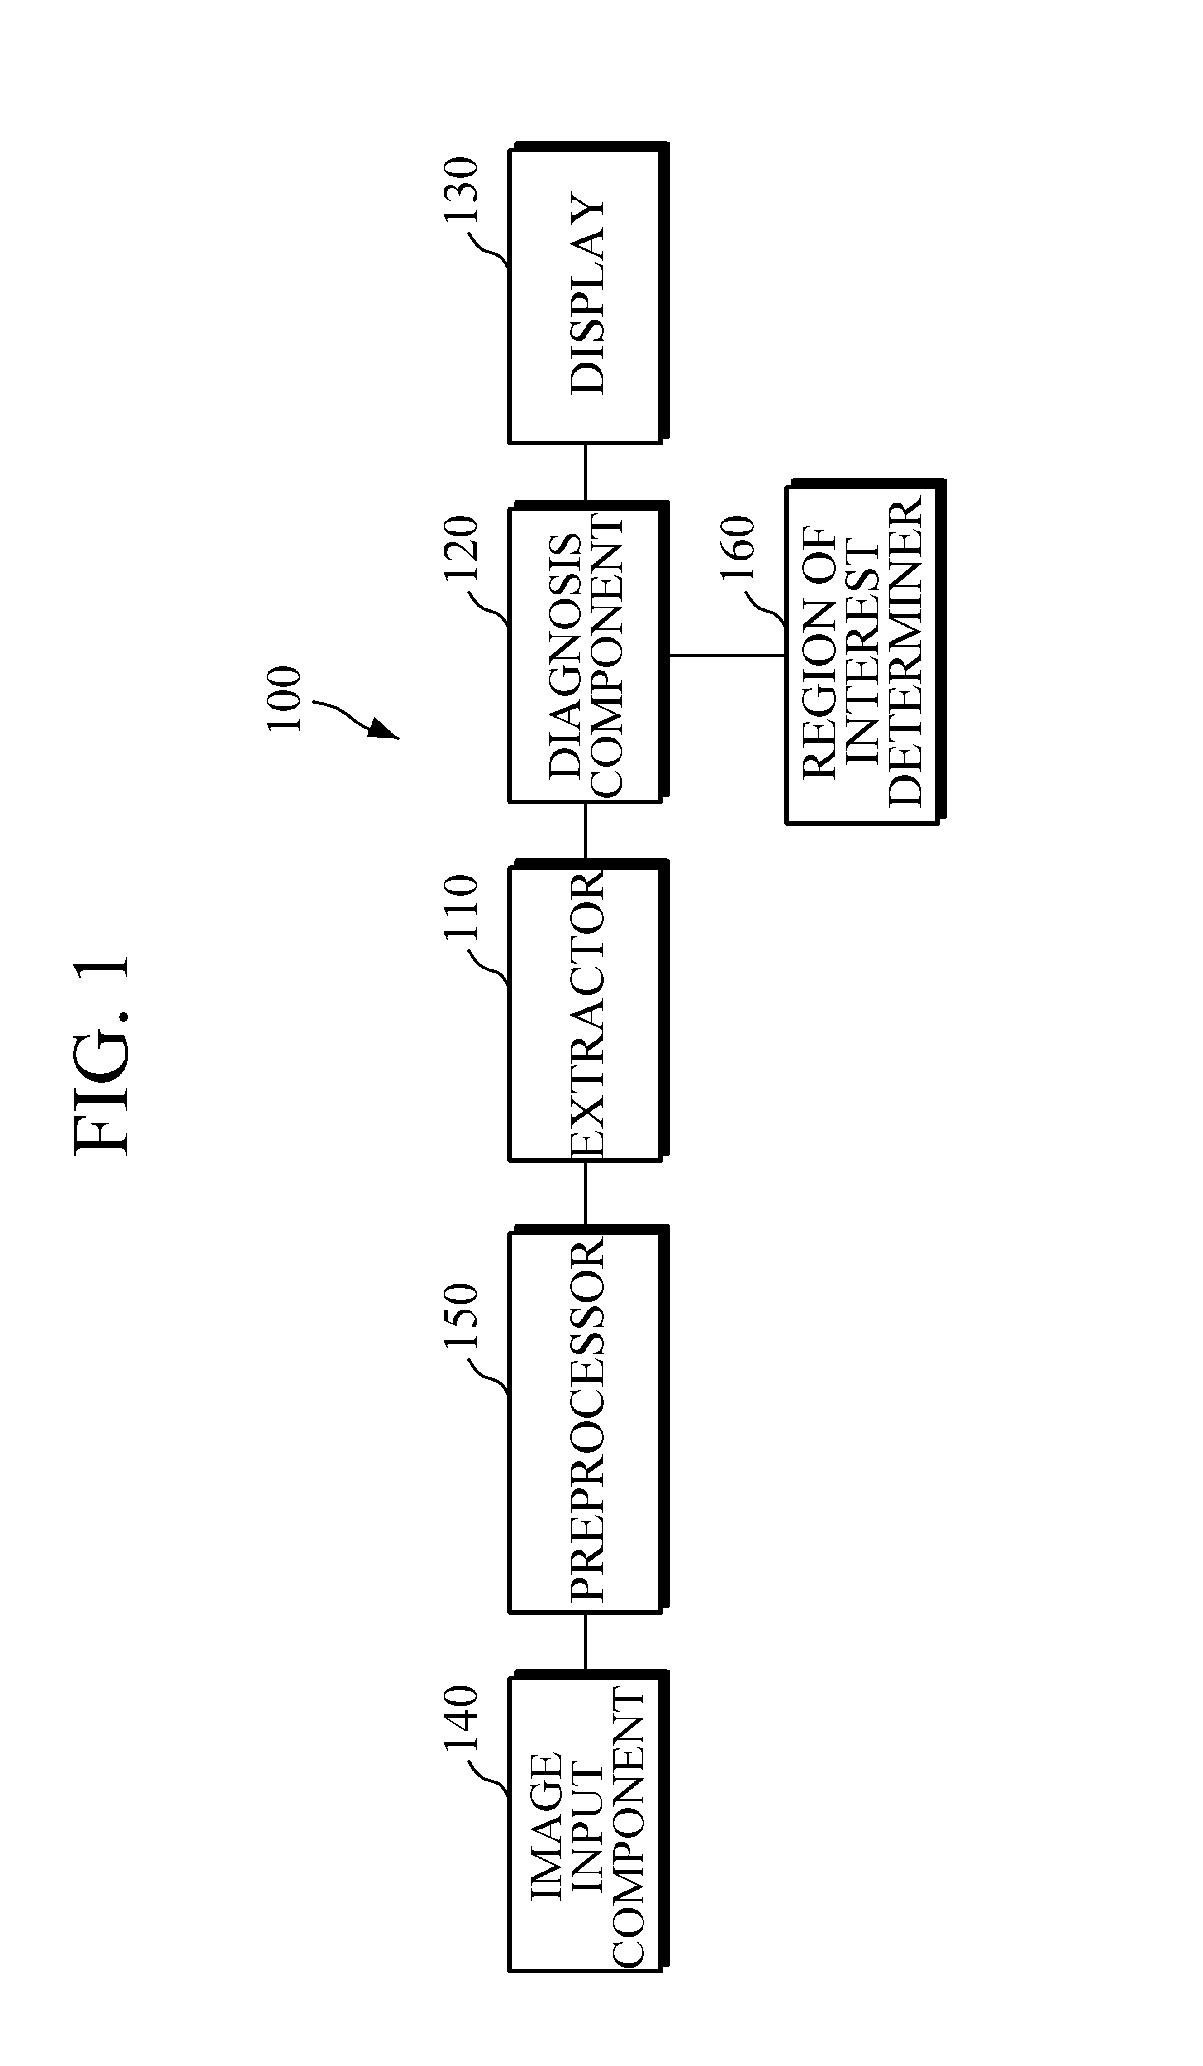 Apparatus and method for aiding imaging dignosis